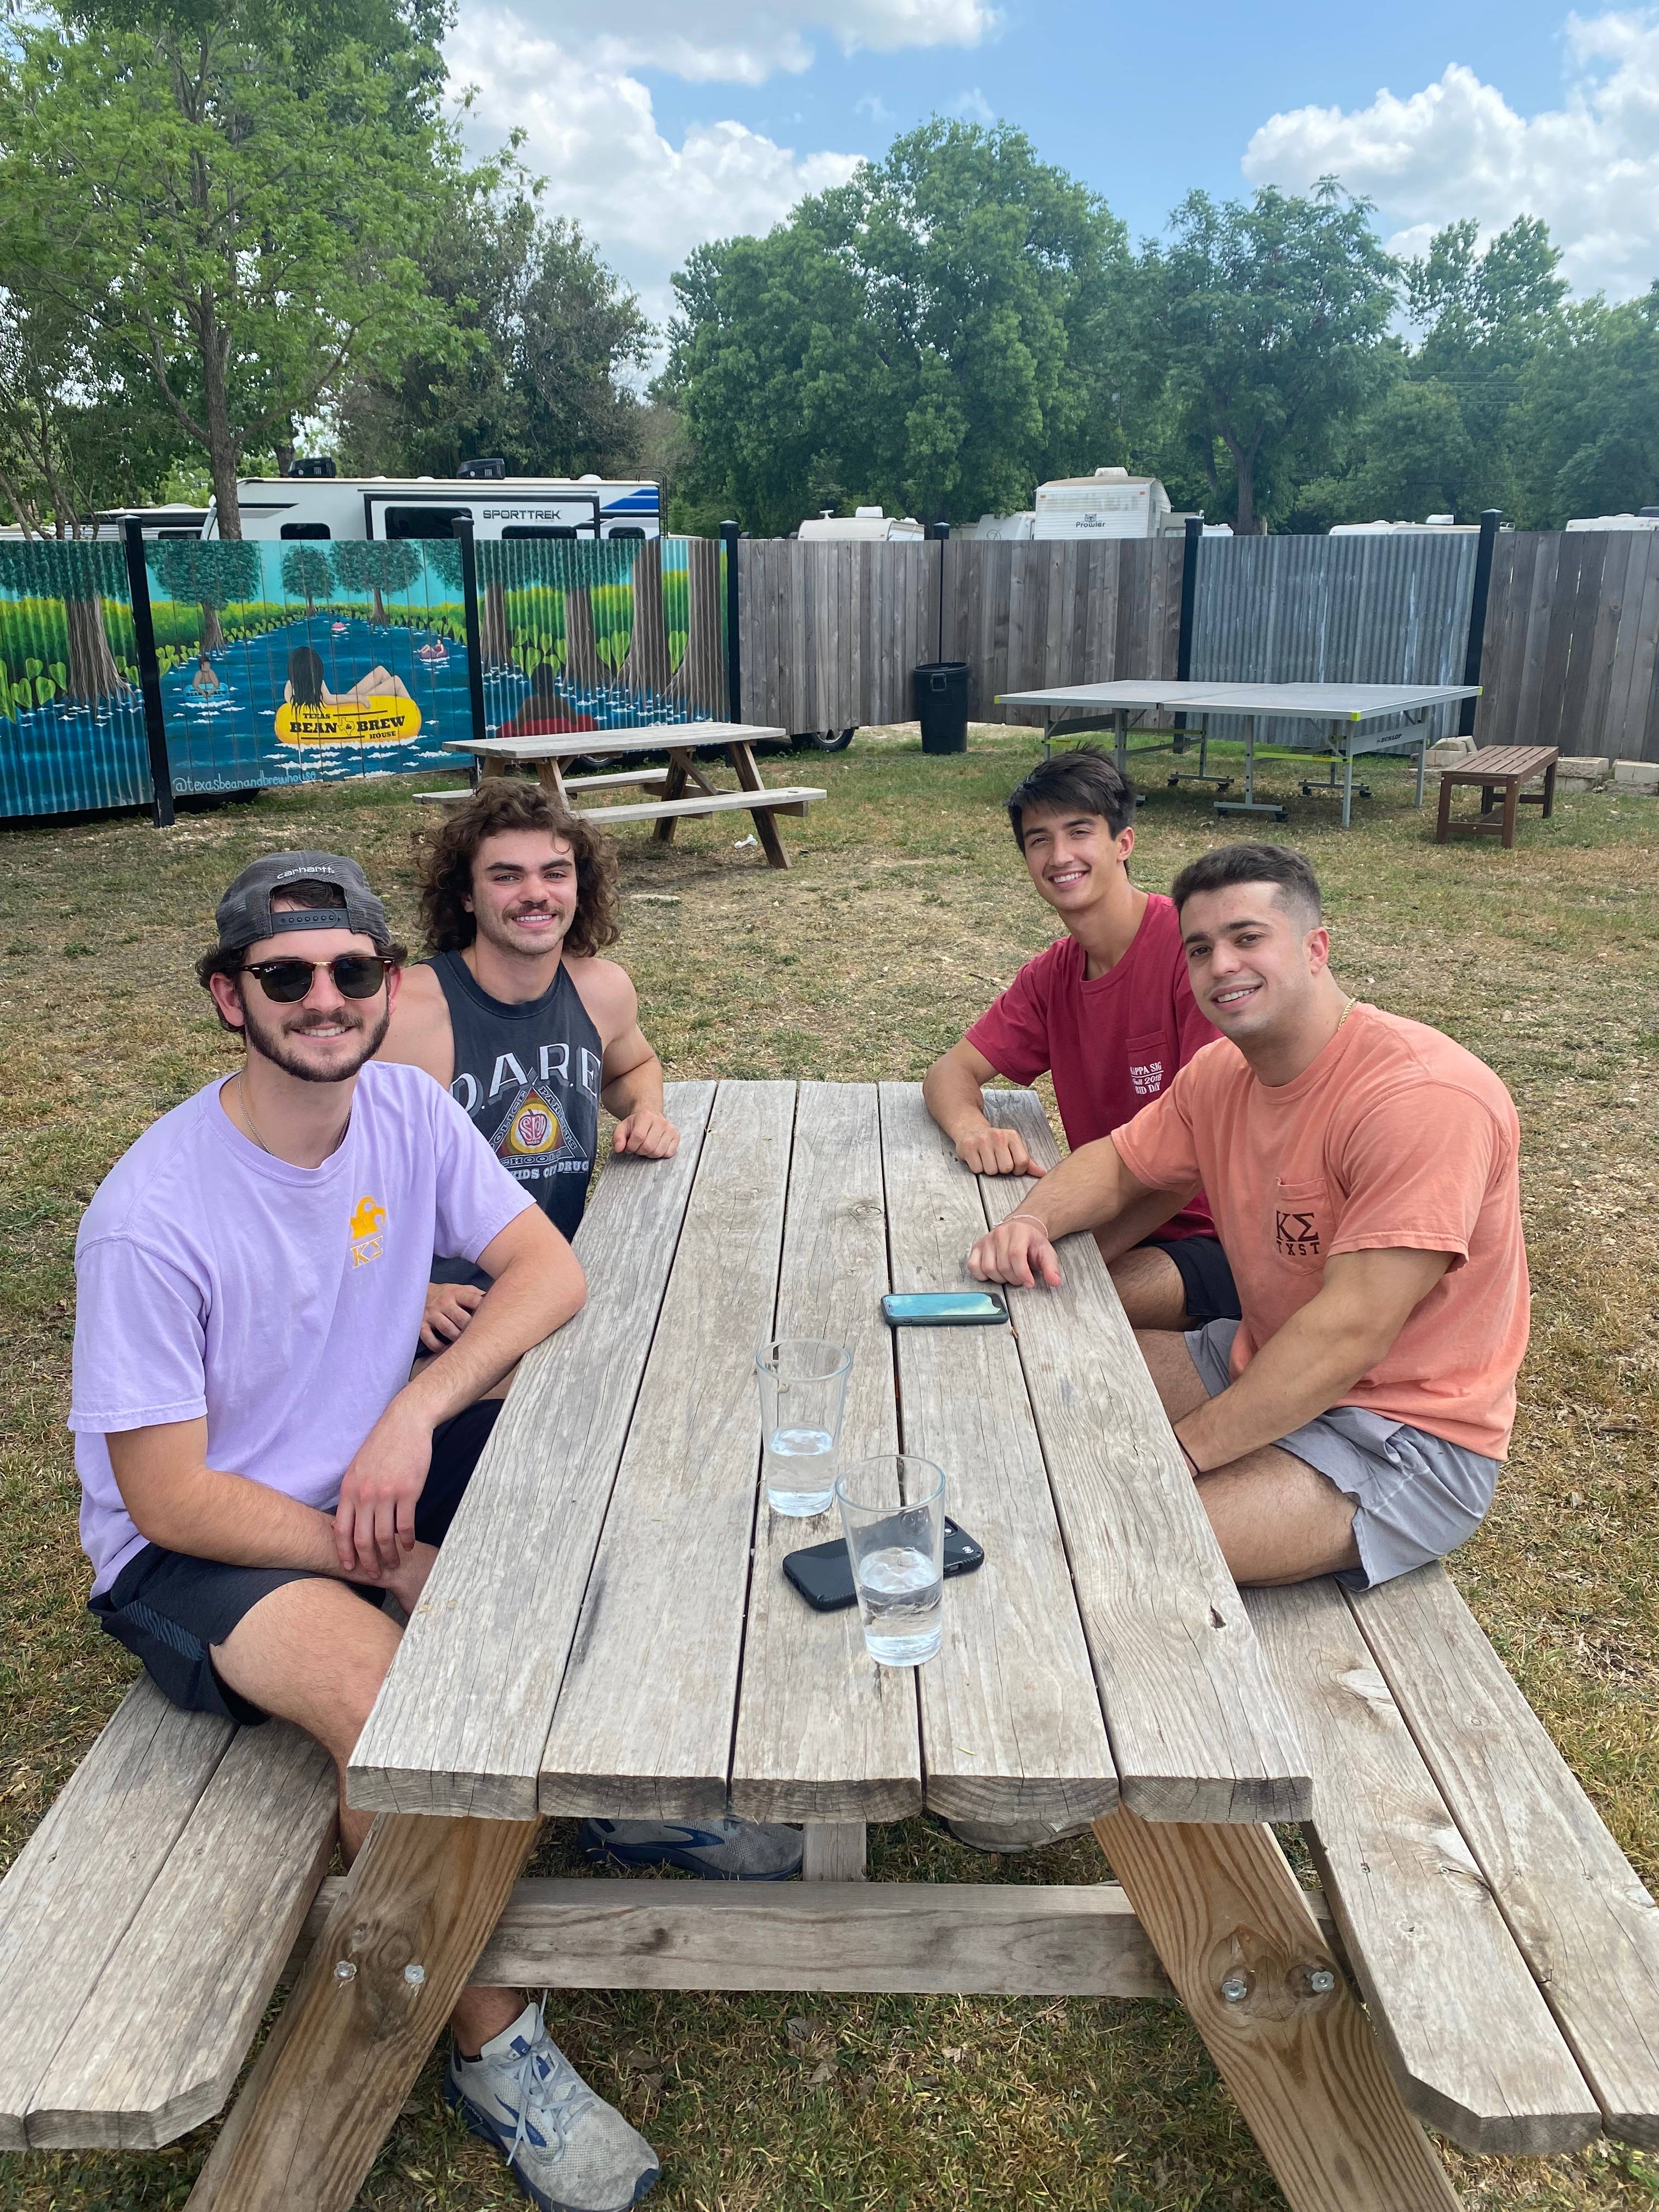 Four men in Kappa Sigma sit at a picnic table outside